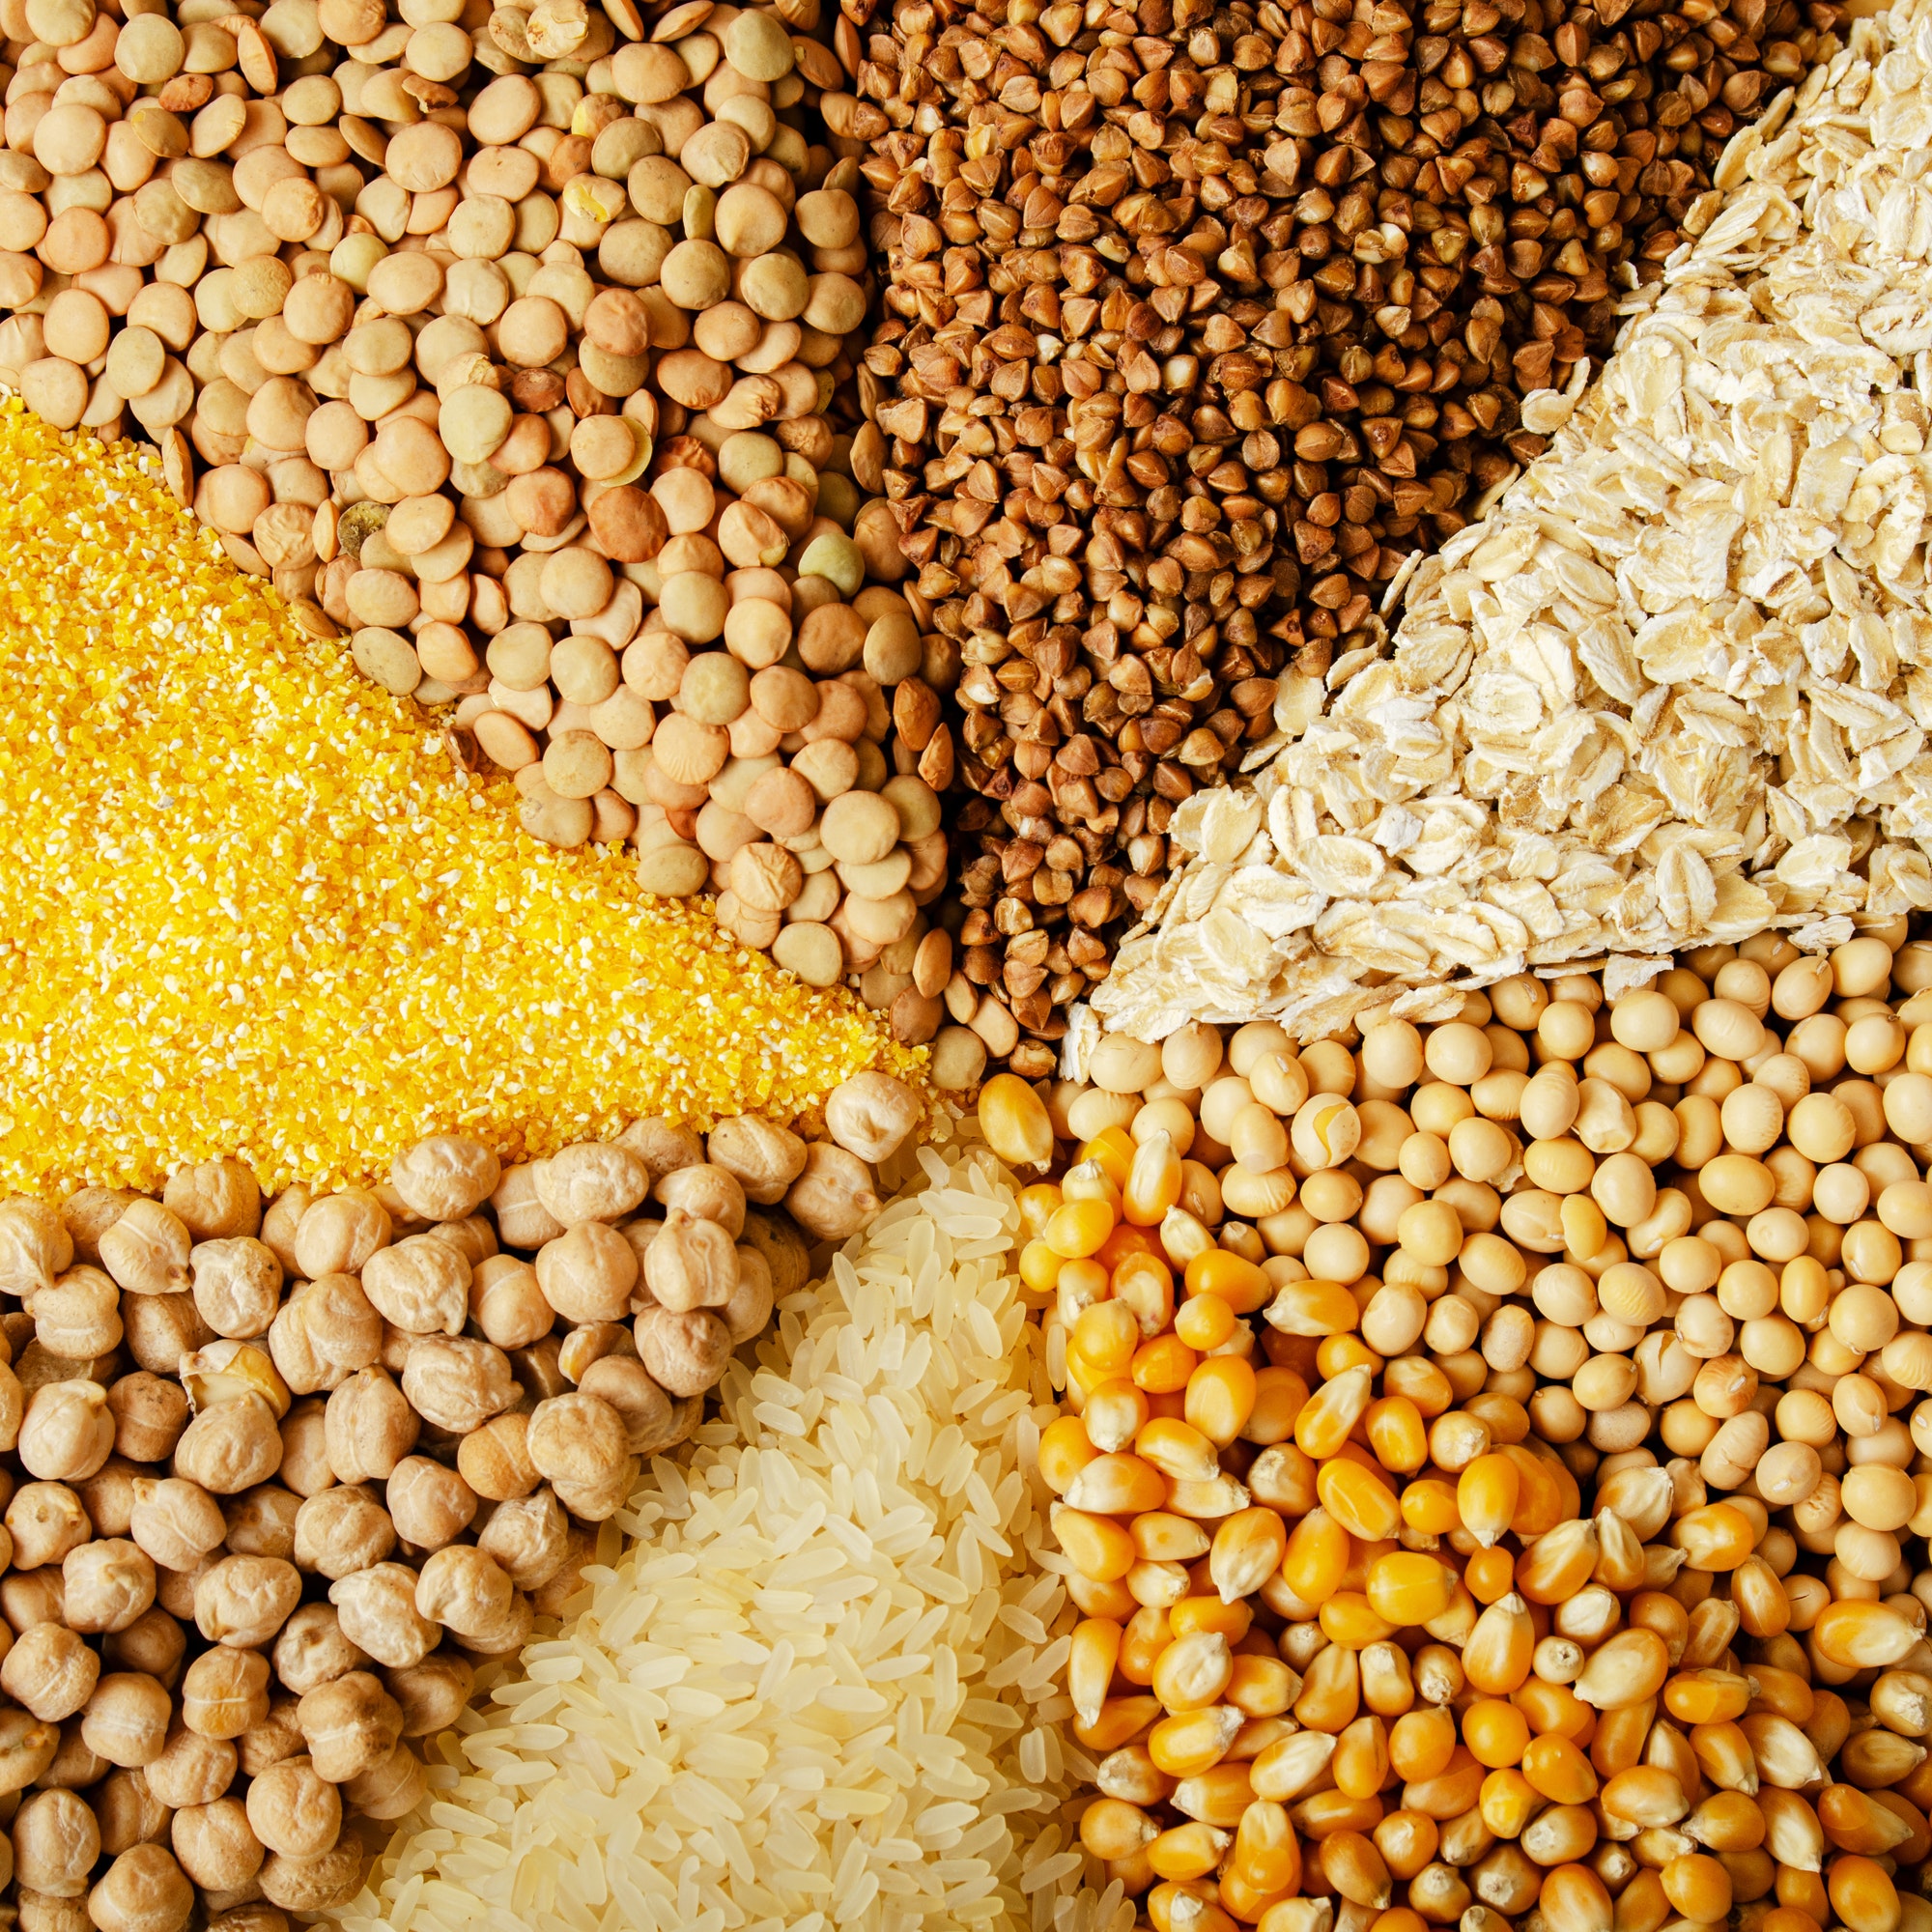 Flat lay food background made of legumes cereals and grains